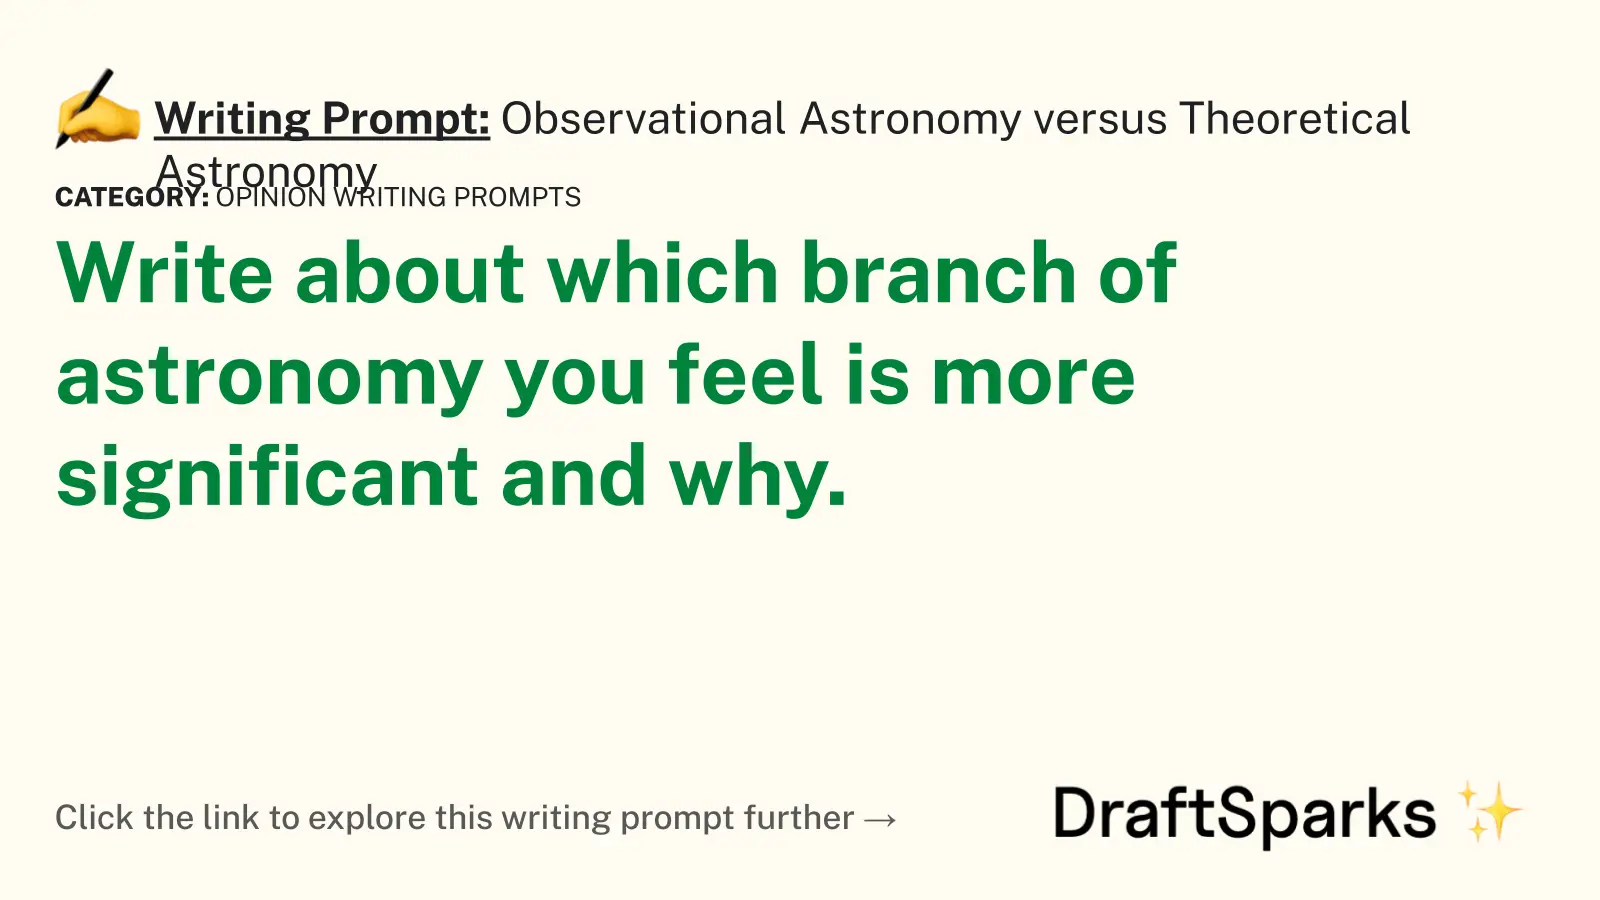 Observational Astronomy versus Theoretical Astronomy